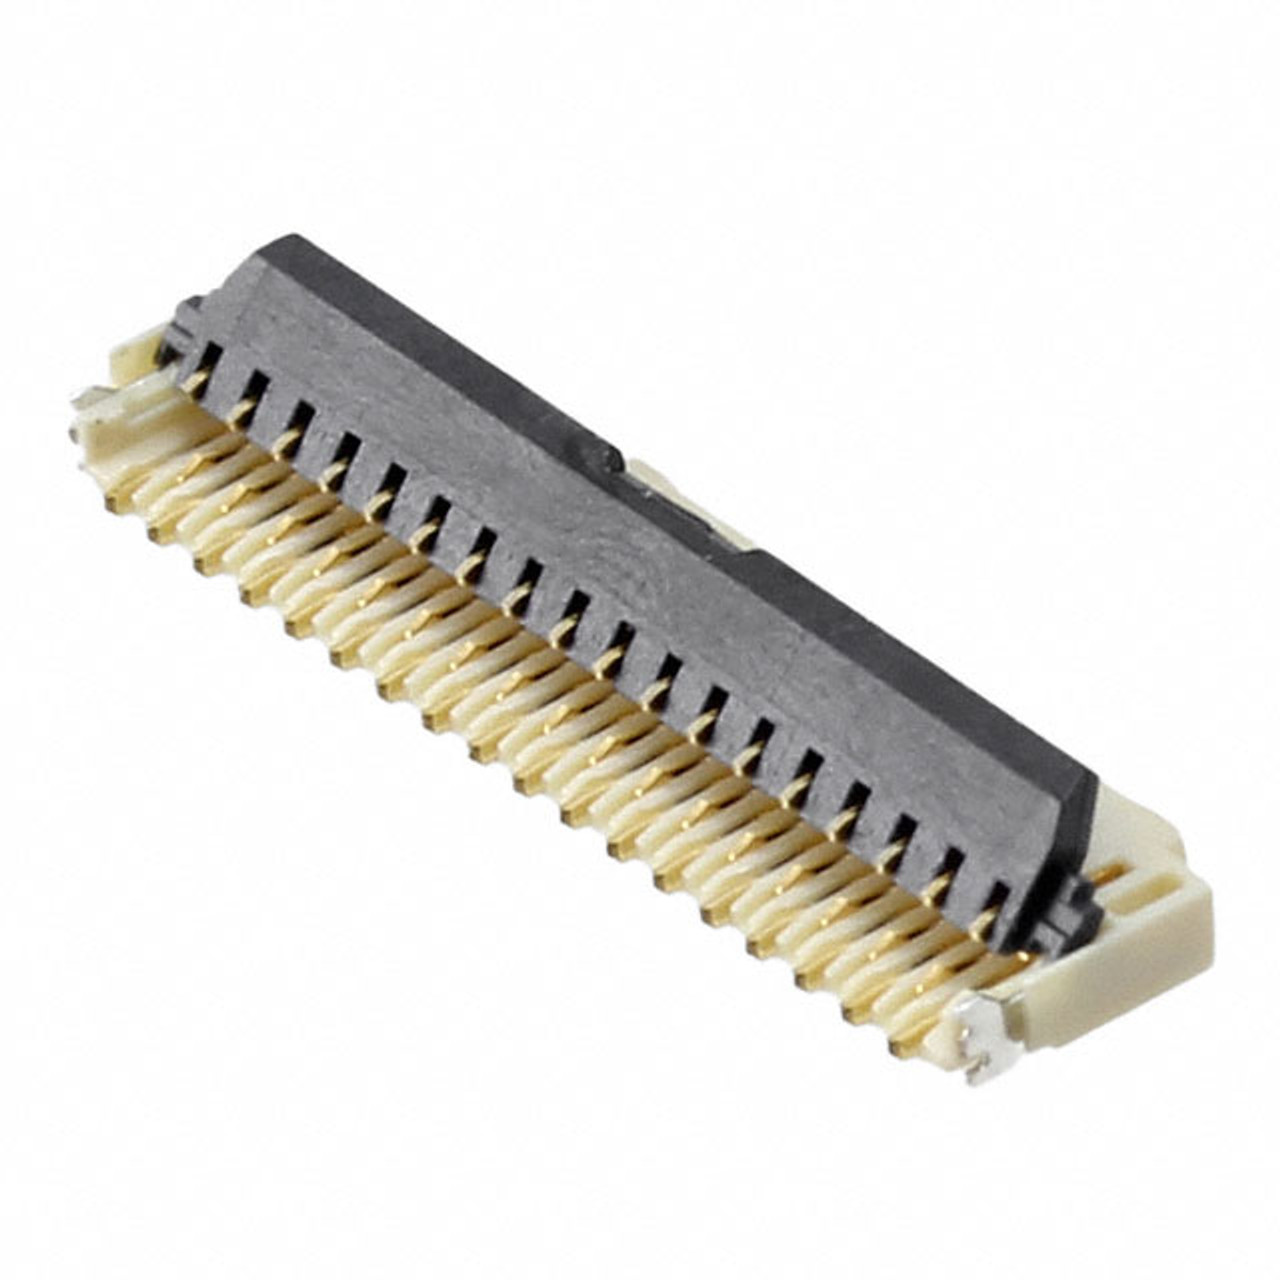 Omron XF3H-3555-31A FFC, FPC (Flat Flexible) Connectors